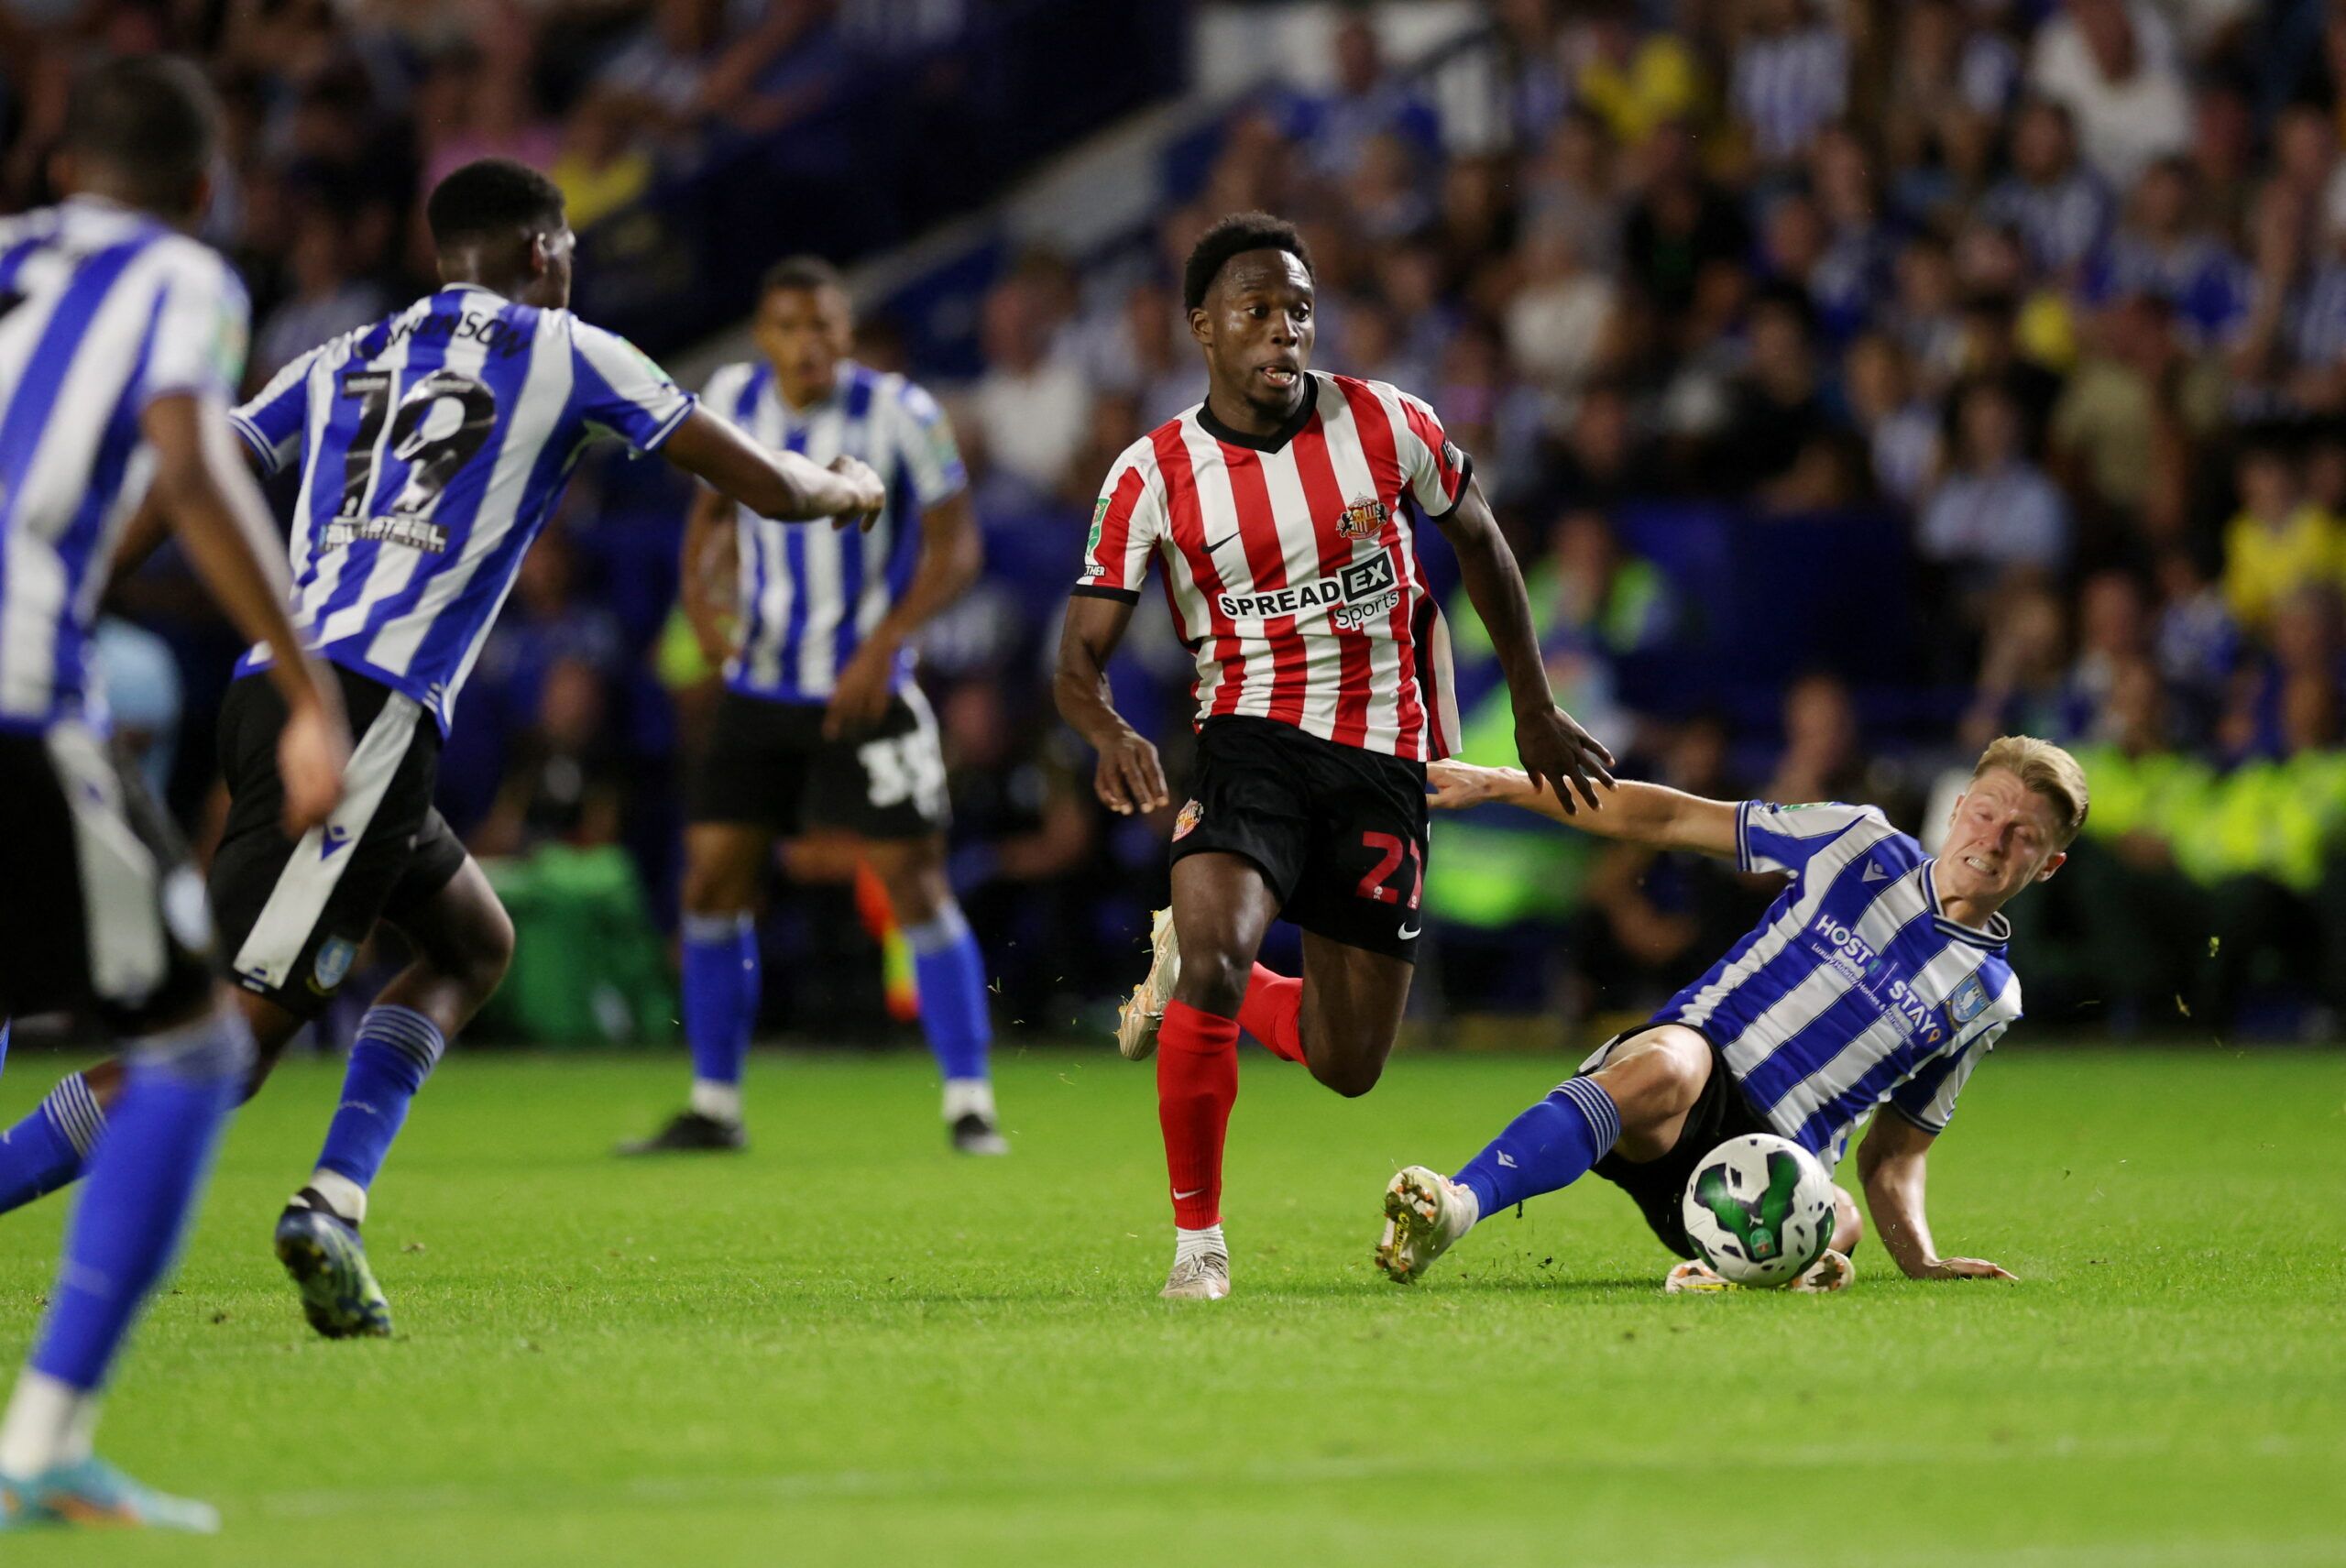 Soccer Football - Carabao Cup - Sheffield Wednesday v Sunderland - Hillsborough Stadium, Sheffield, Britain - August 10, 2022 Sunderland’s Jay Matete in action  Action Images/Lee Smith  EDITORIAL USE ONLY. No use with unauthorized audio, video, data, fixture lists, club/league logos or 